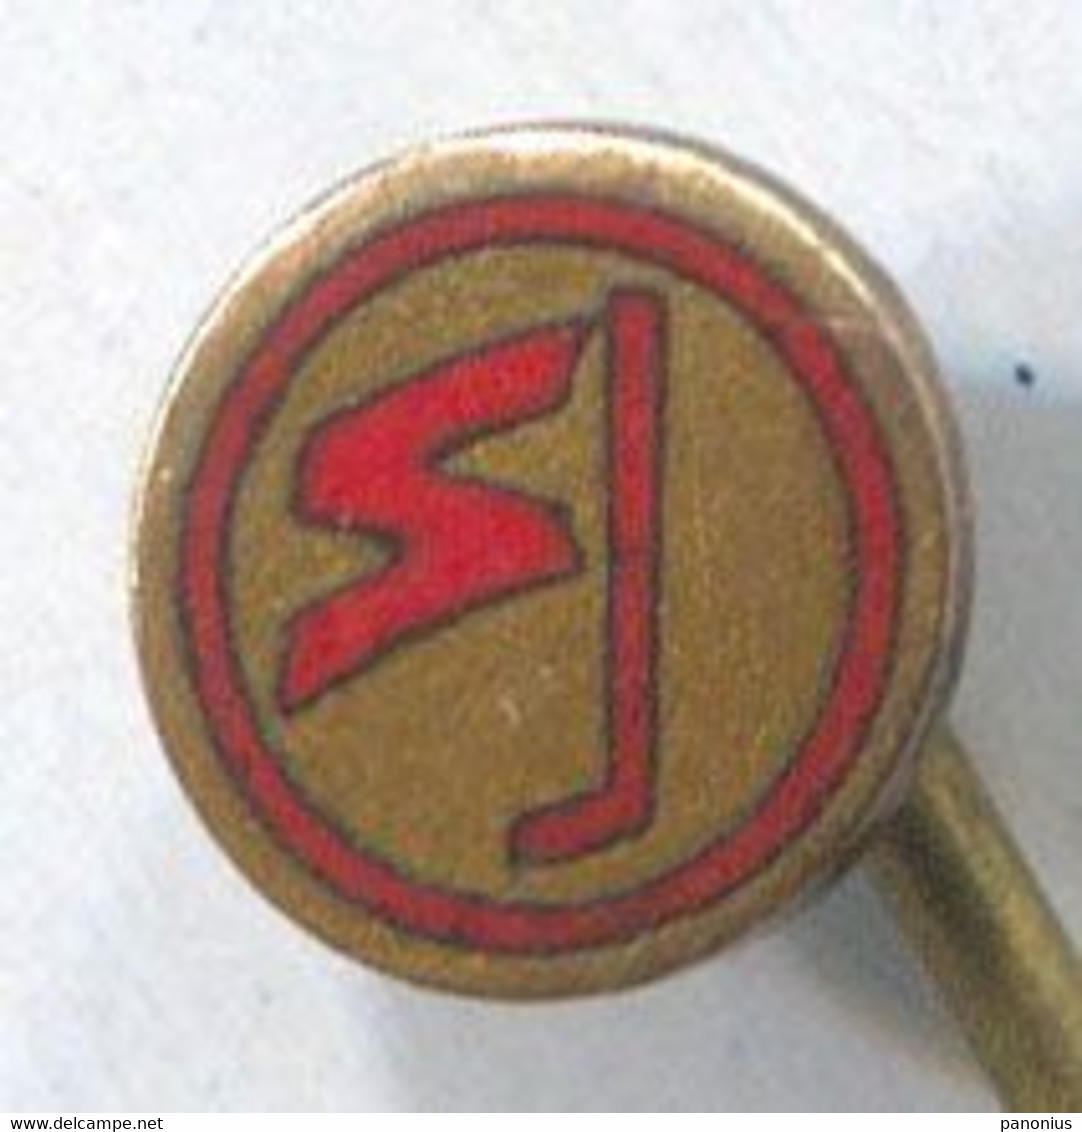 ICE HOCKEY - Germany Enamel, Vintage Pin, Badge, Abzeichen - Sports D'hiver